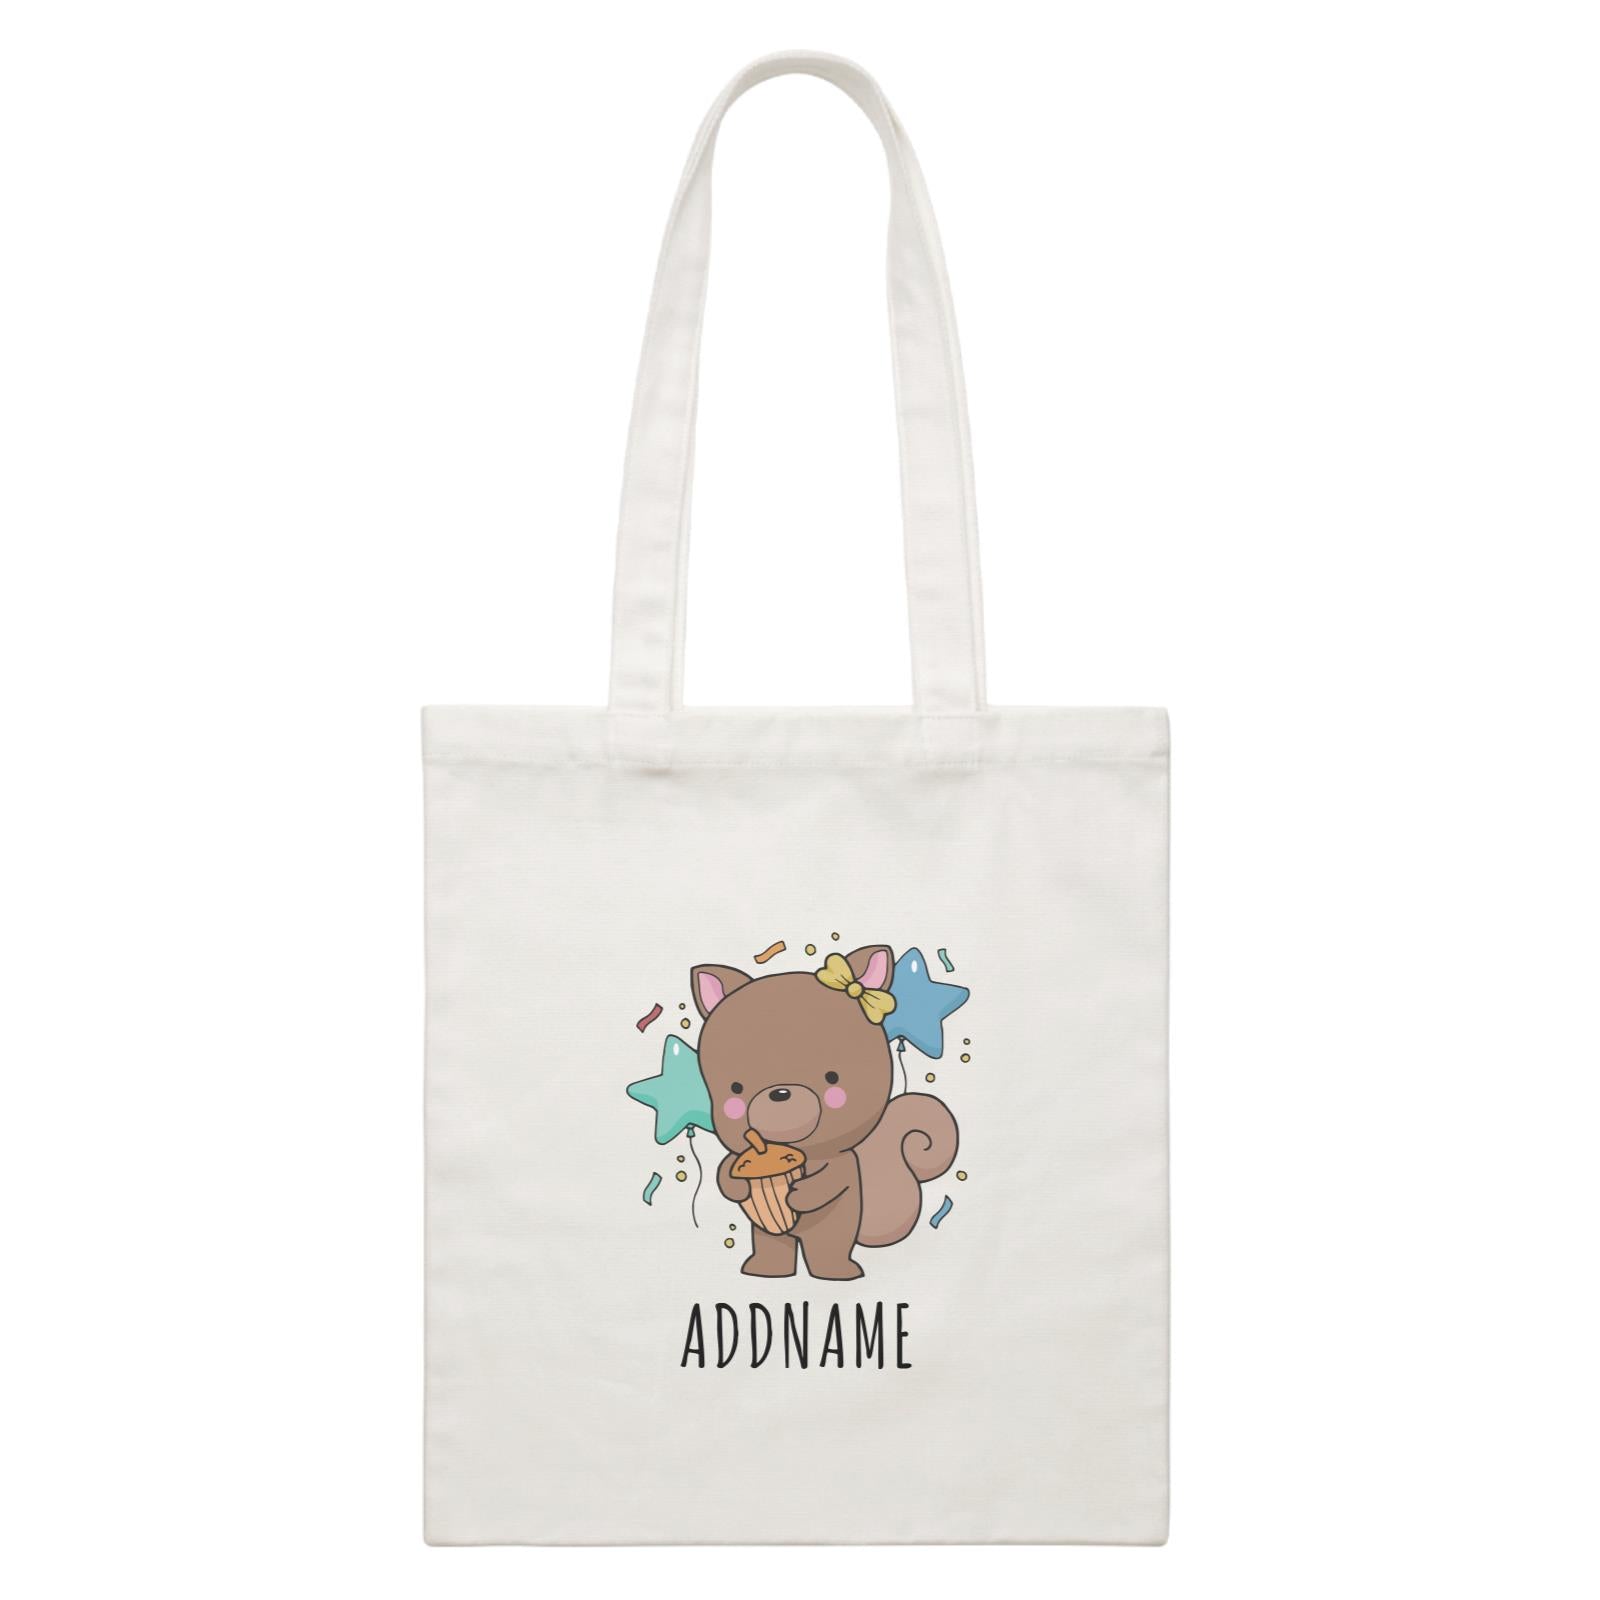 Birthday Sketch Animals Squirrel with Acorn Addname Turns 1 White Canvas Bag